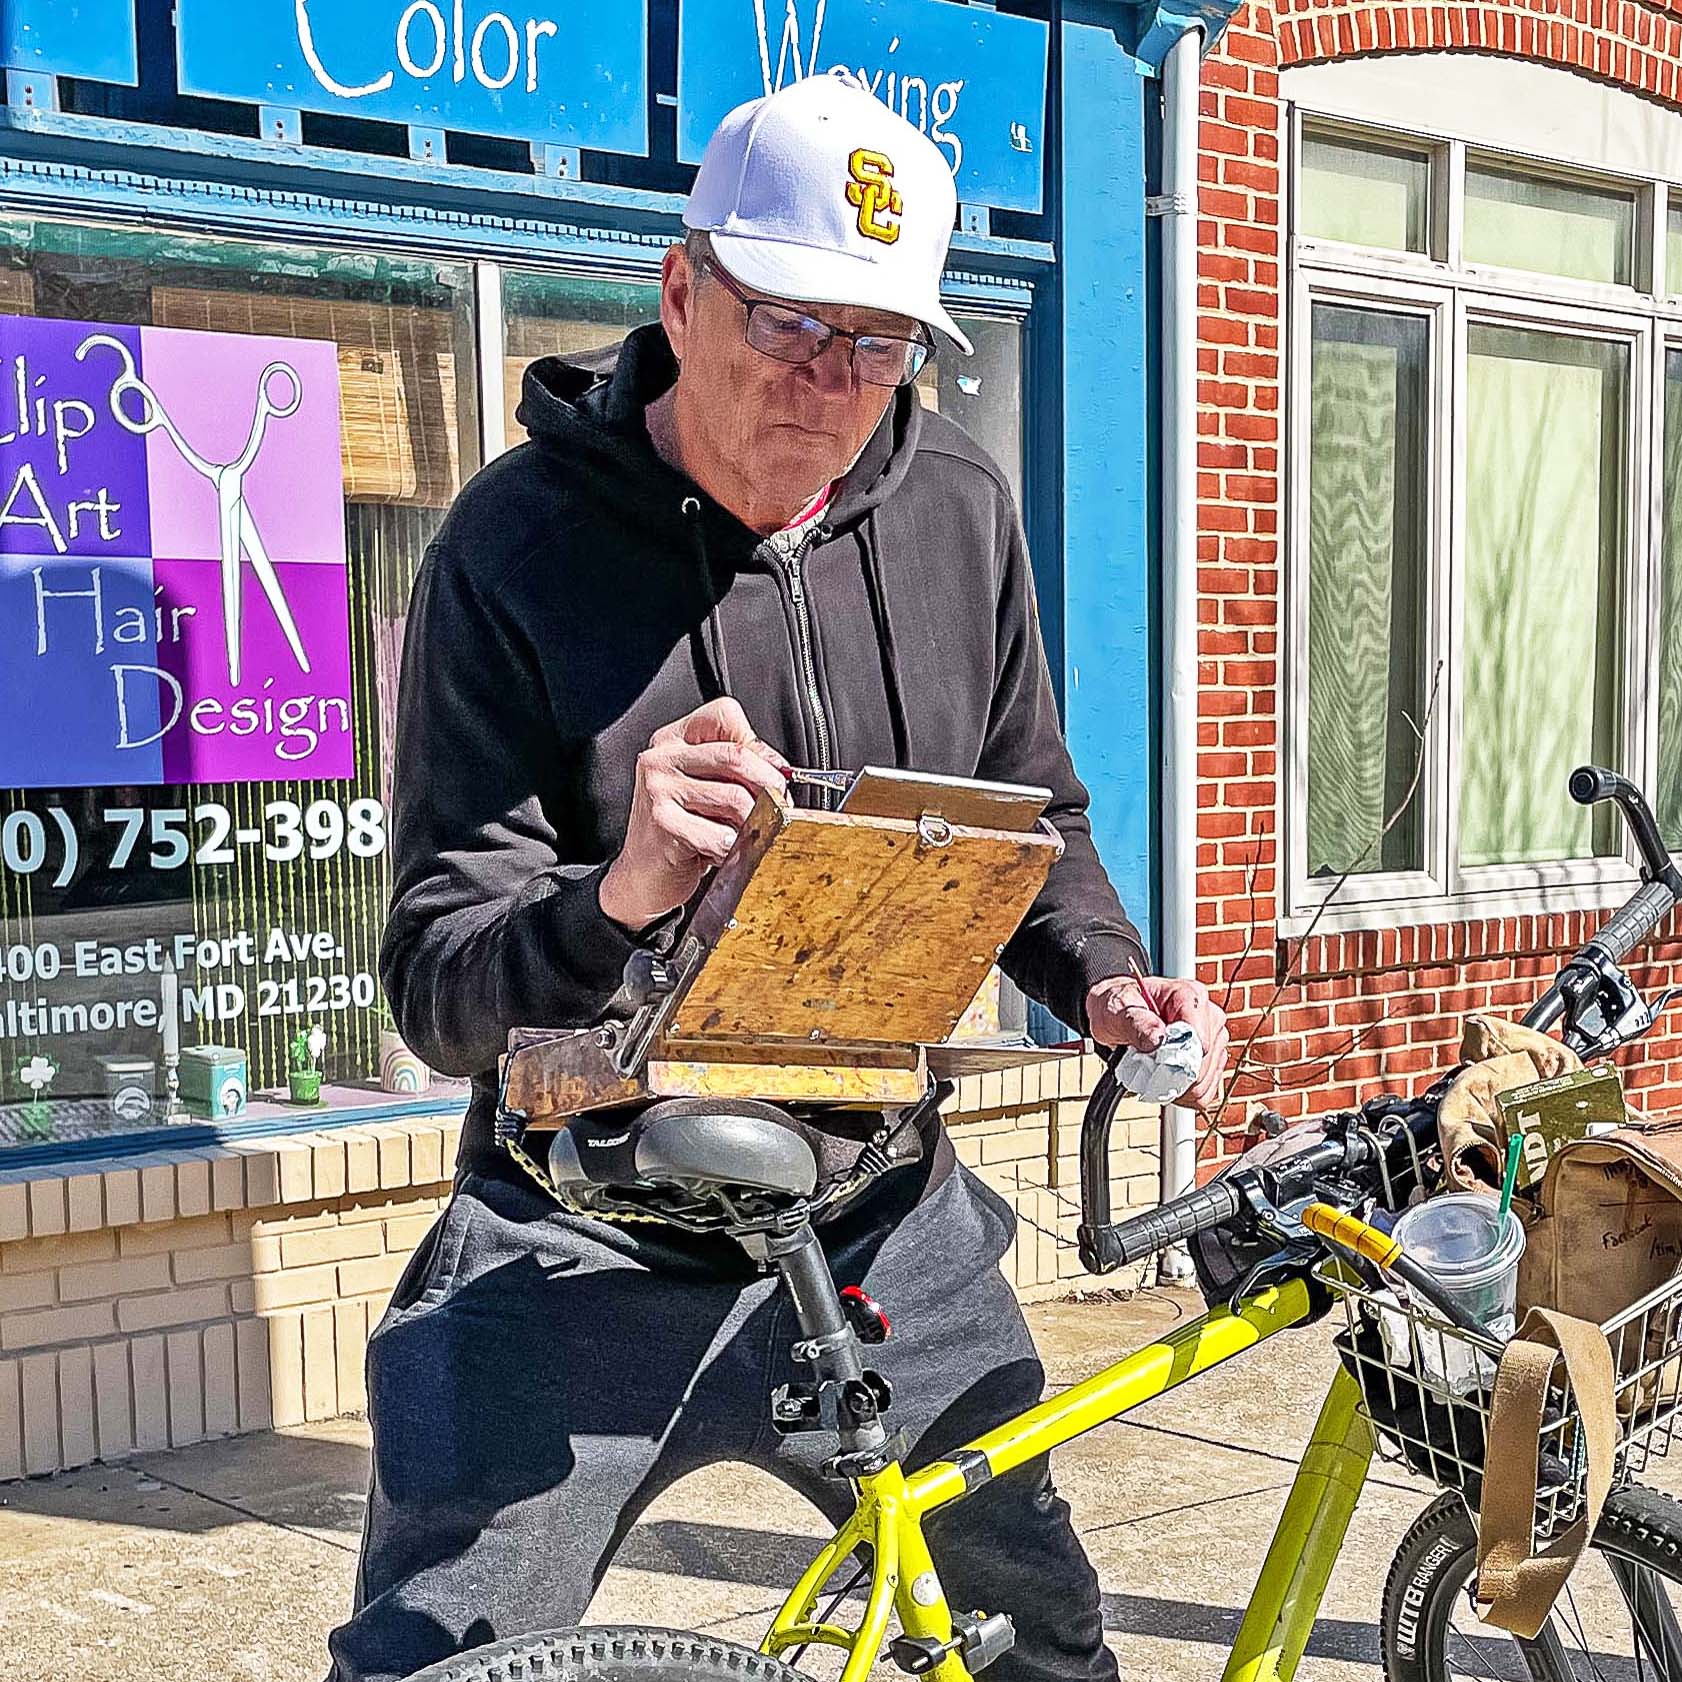 Tim also sets up for plein air painting with this "bike easel" set up, shown here in Baltimore